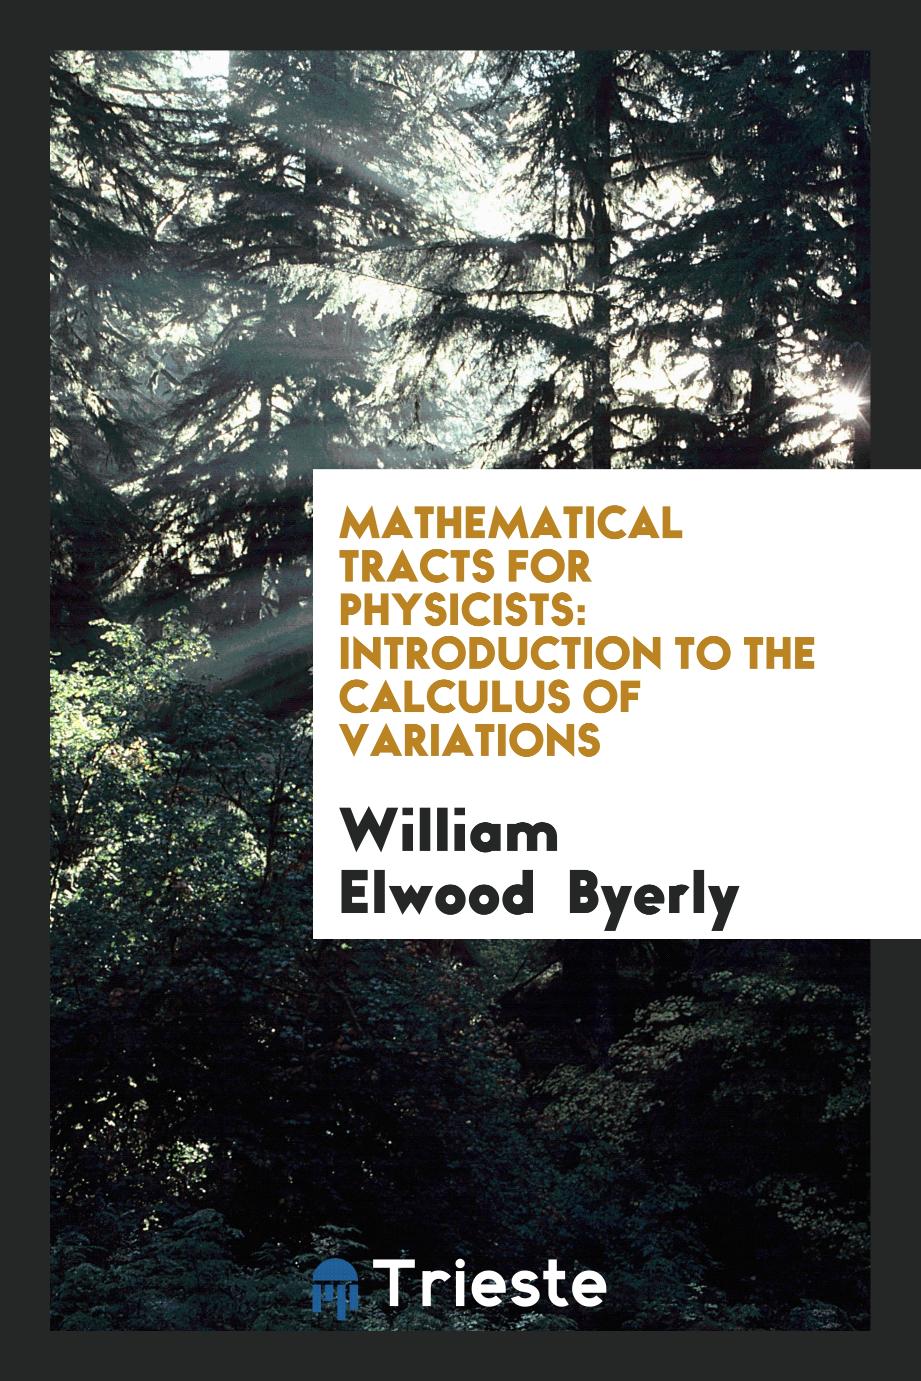 Mathematical Tracts for physicists: Introduction to the Calculus of Variations